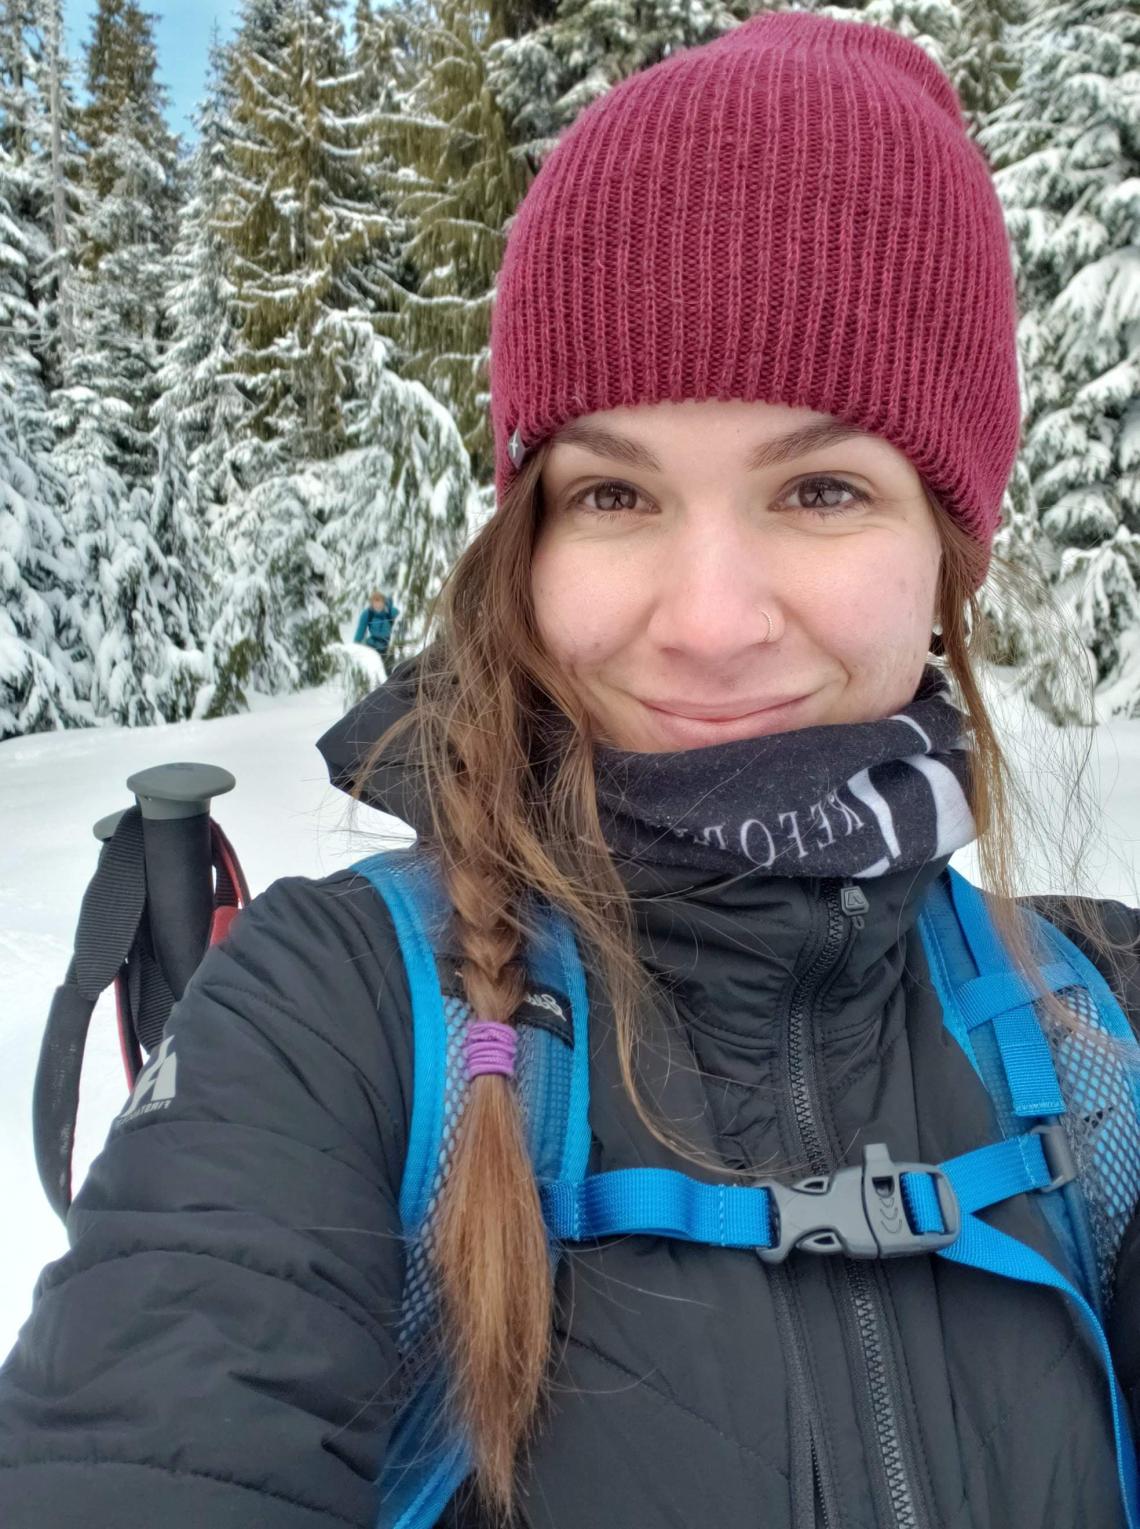 Chyanne out hiking in a snowy forest